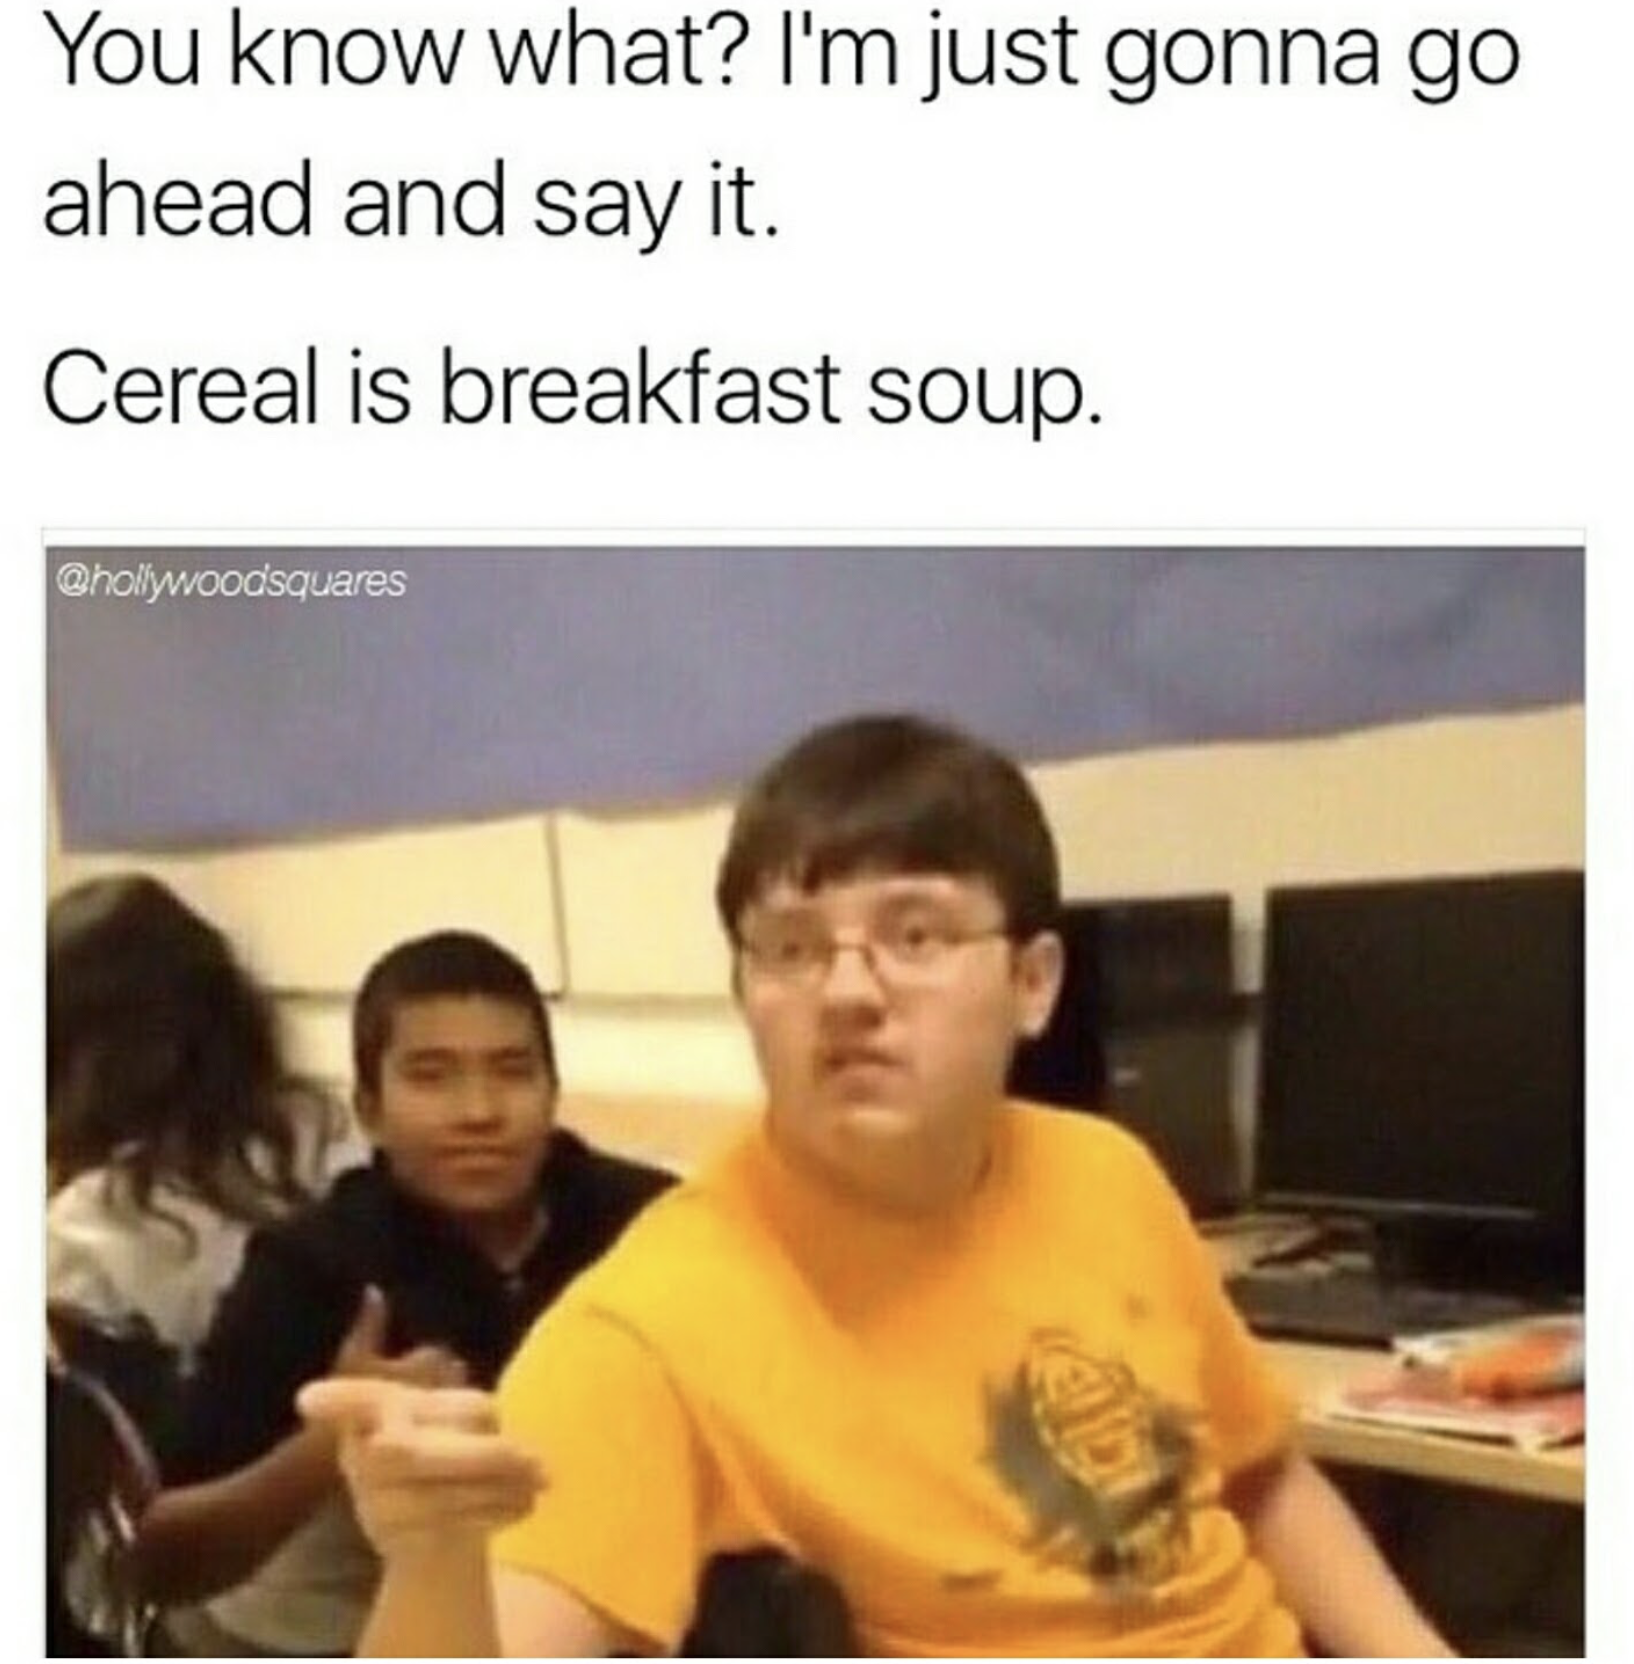 you know what i m gonna say - You know what? I'm just gonna go ahead and say it. Cereal is breakfast soup. whollywoodsquares